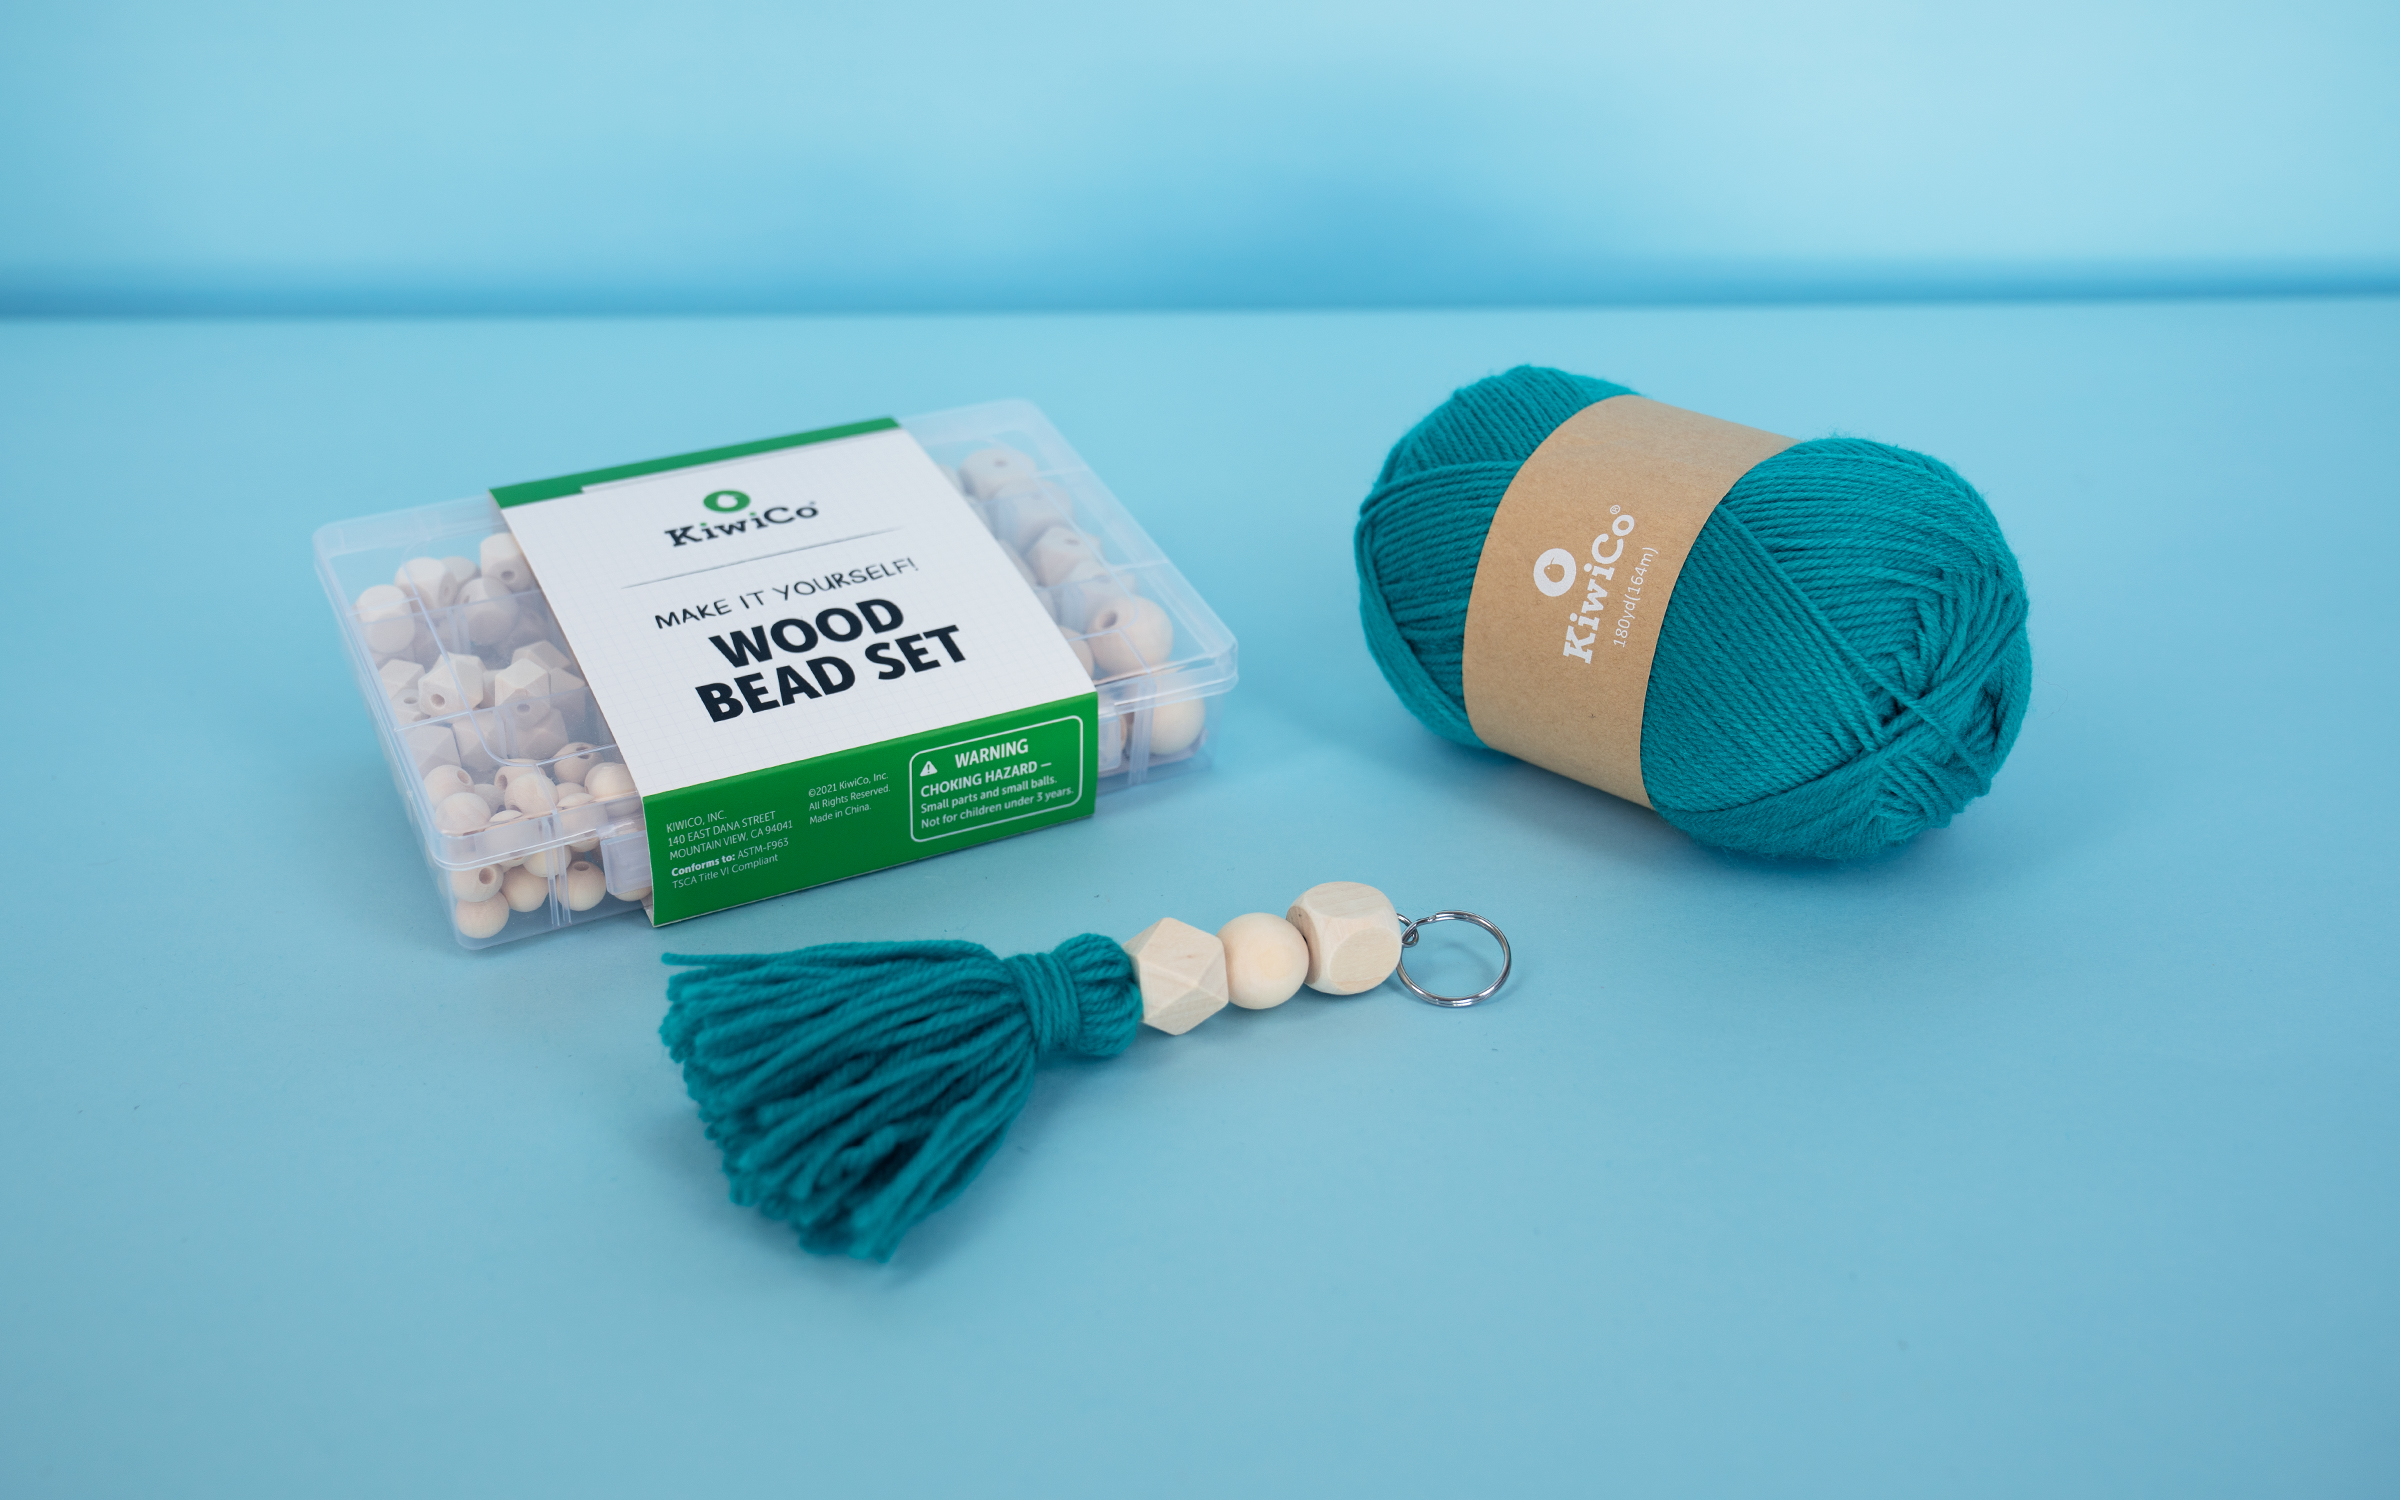 The New Collection Yarn Bundle